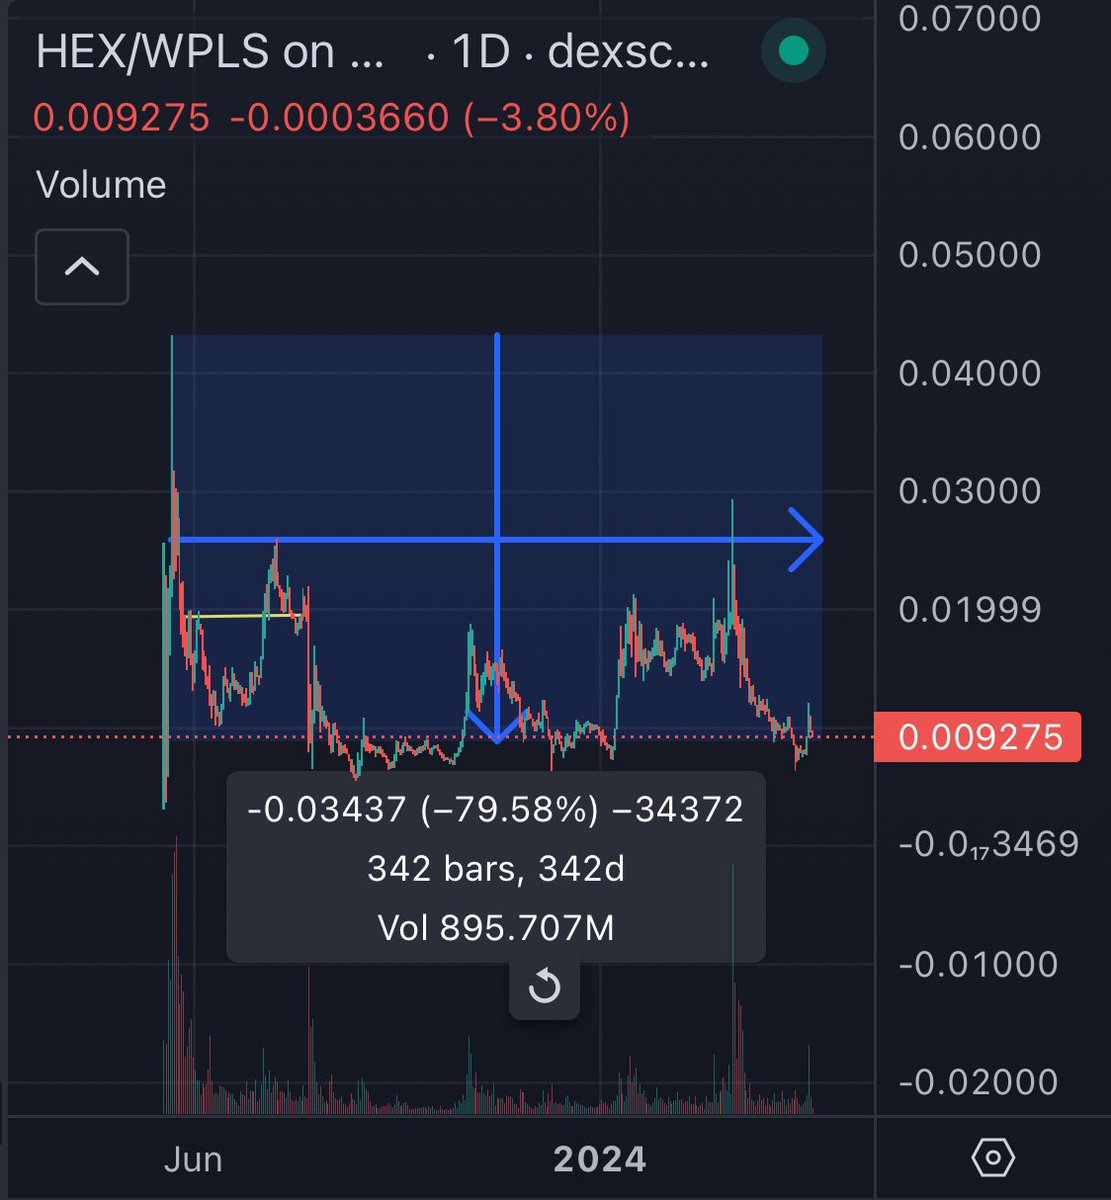 Okay guys, so hex is not a coin that had an all time high of 55 cents Hex also never did a 10,000x Hex is a new(ish) coin that made an all time high when it launched about a year ago and is down 80% since Let’s see what the future holds Clean slate, new narrative